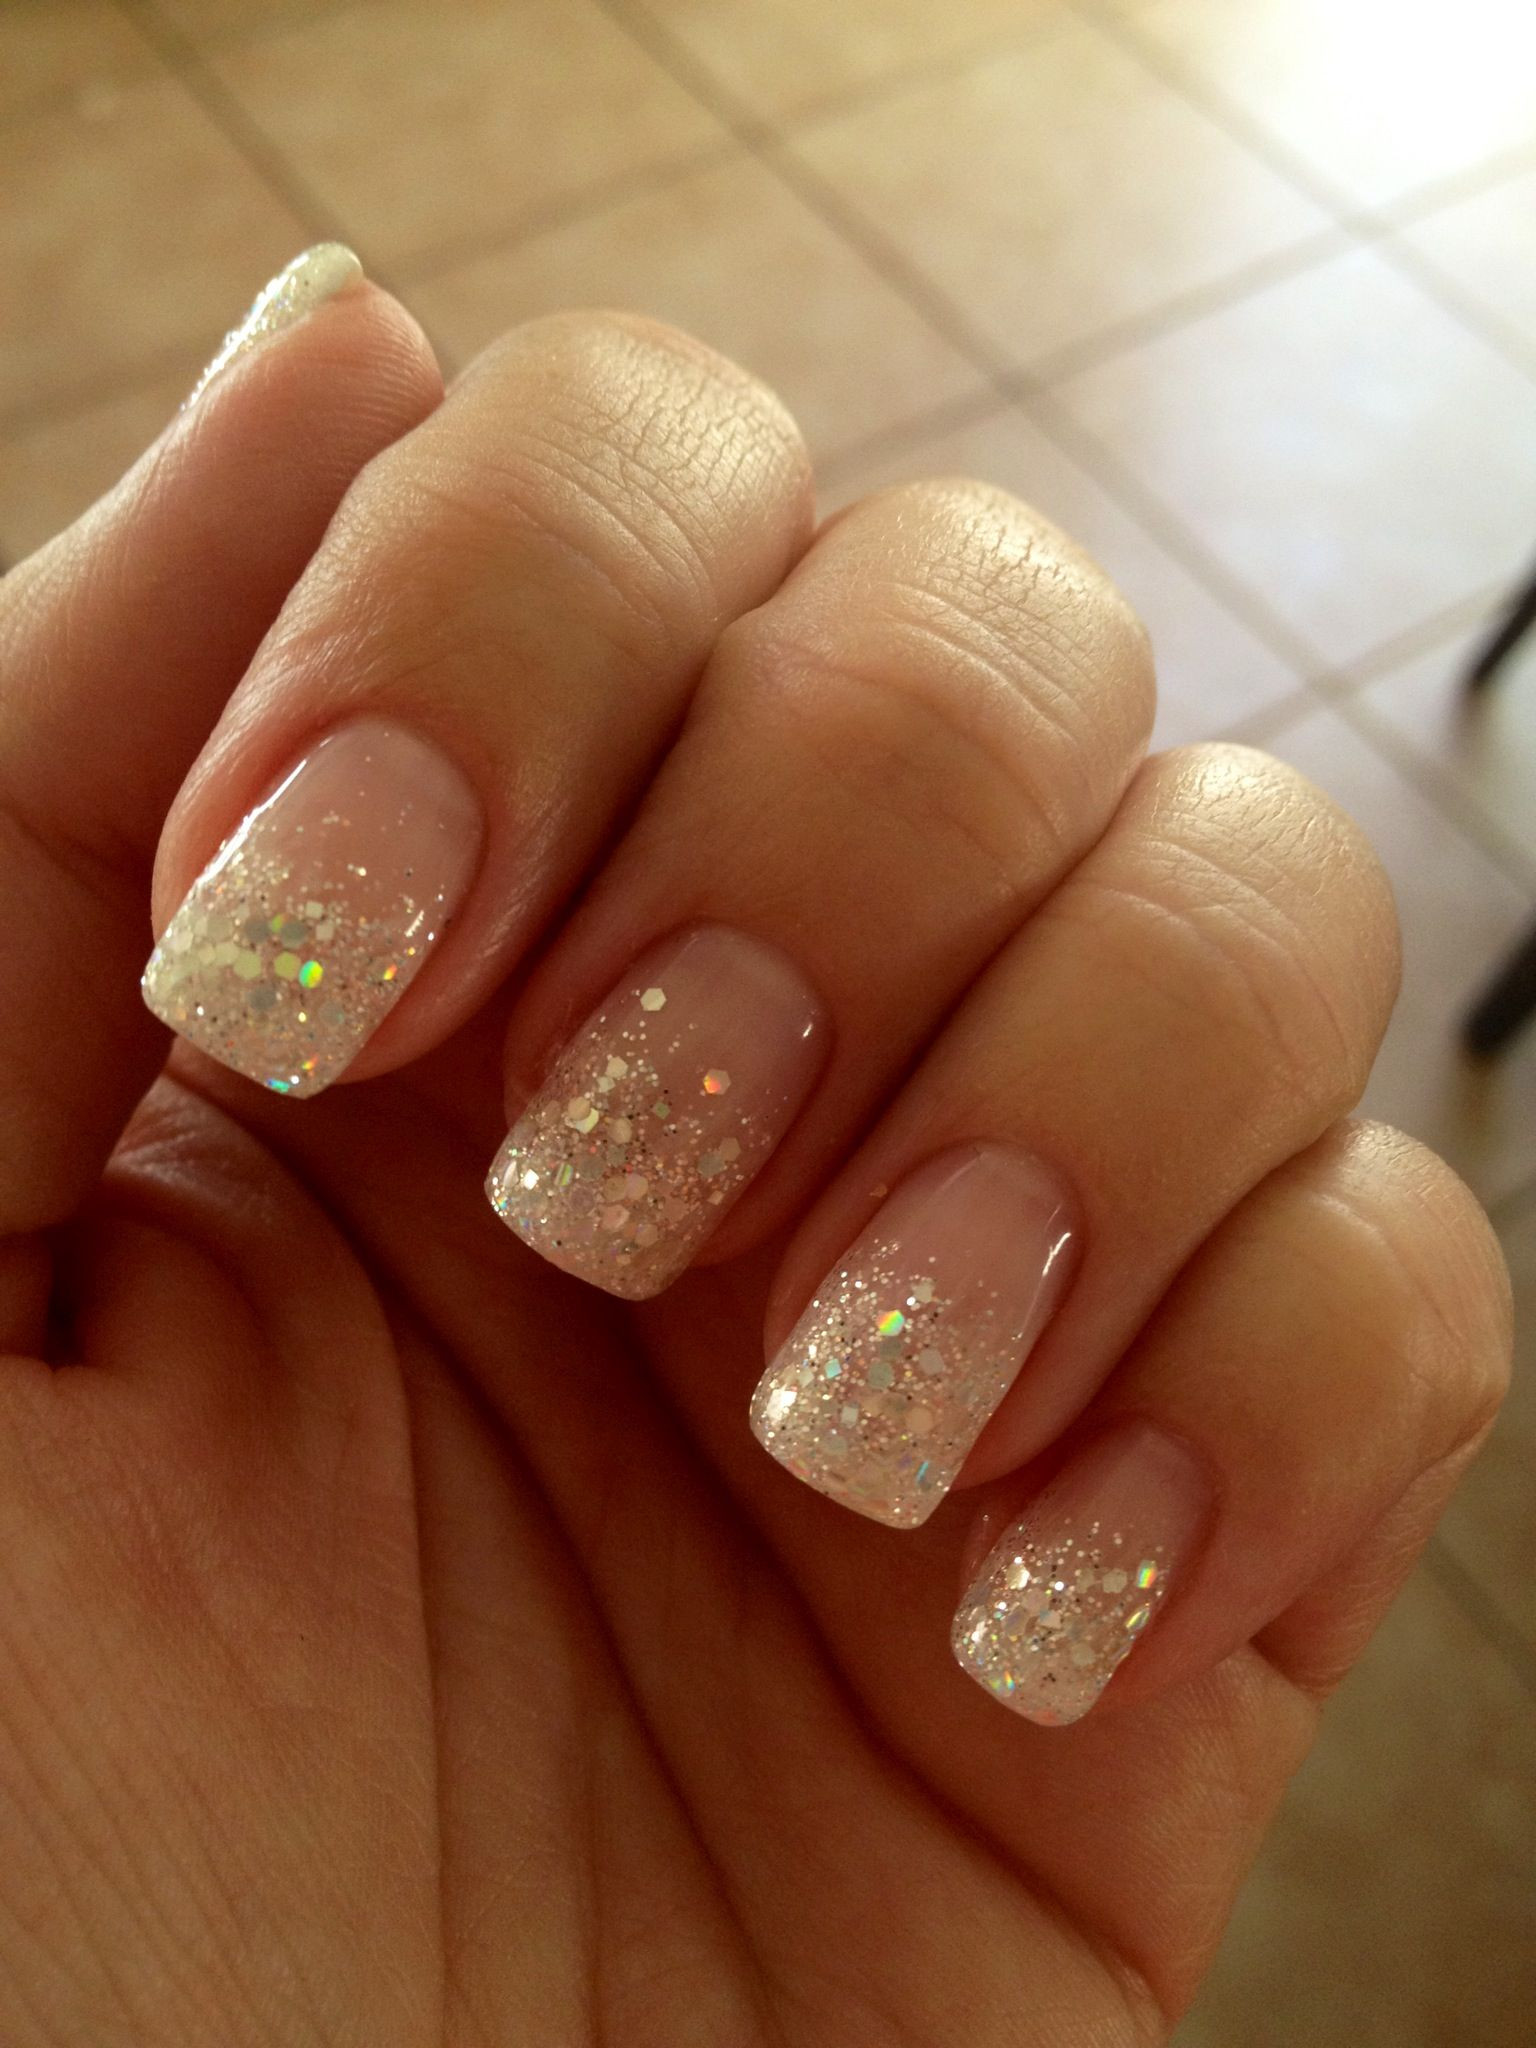 French Tip Nail Designs With Glitter
 Glitter French Manicure Fade Can you say wedding nails